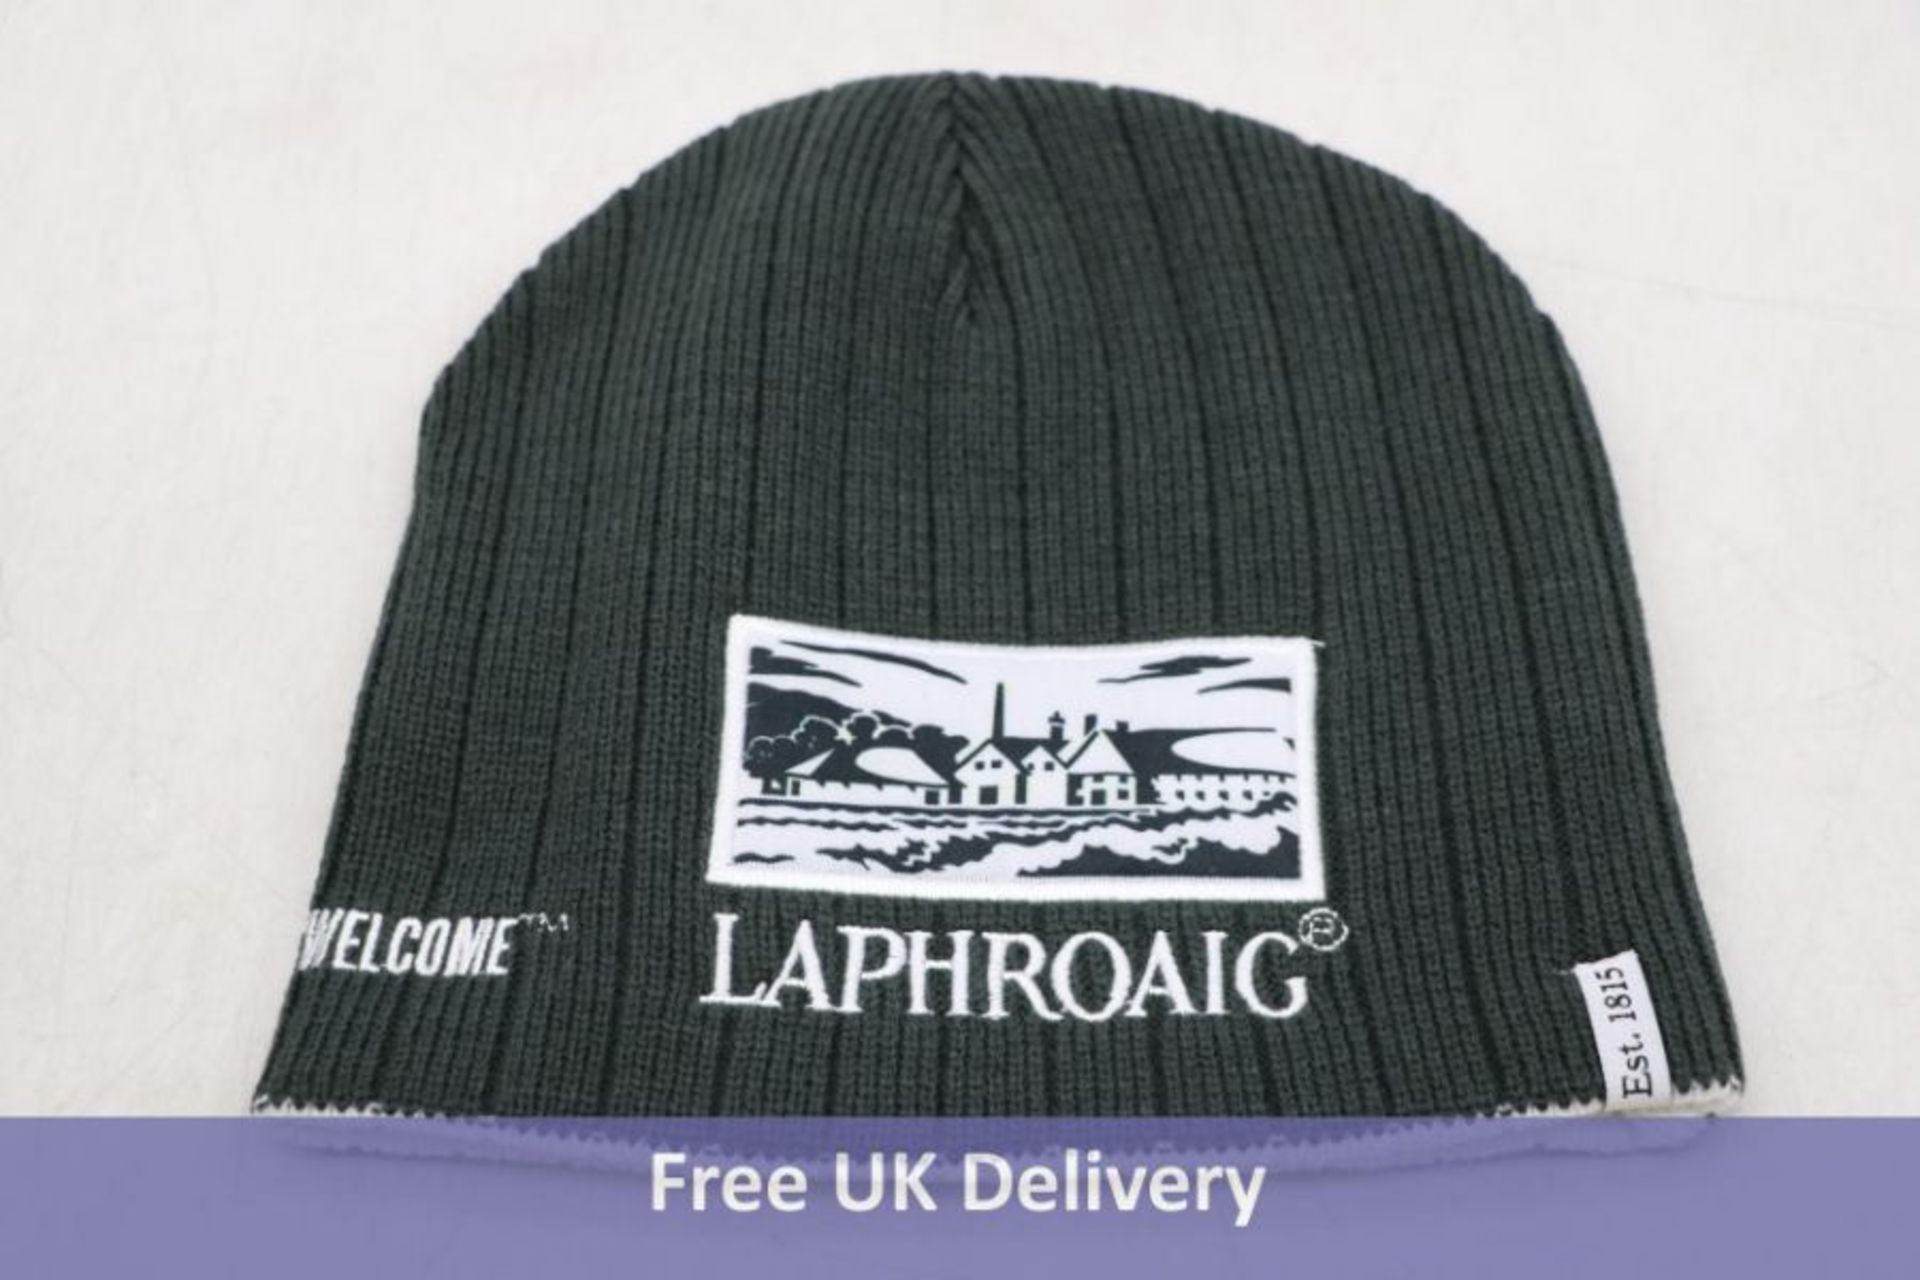 Nine Laphroaig Reversible Beanie Hat, Charcoal and White, One Size